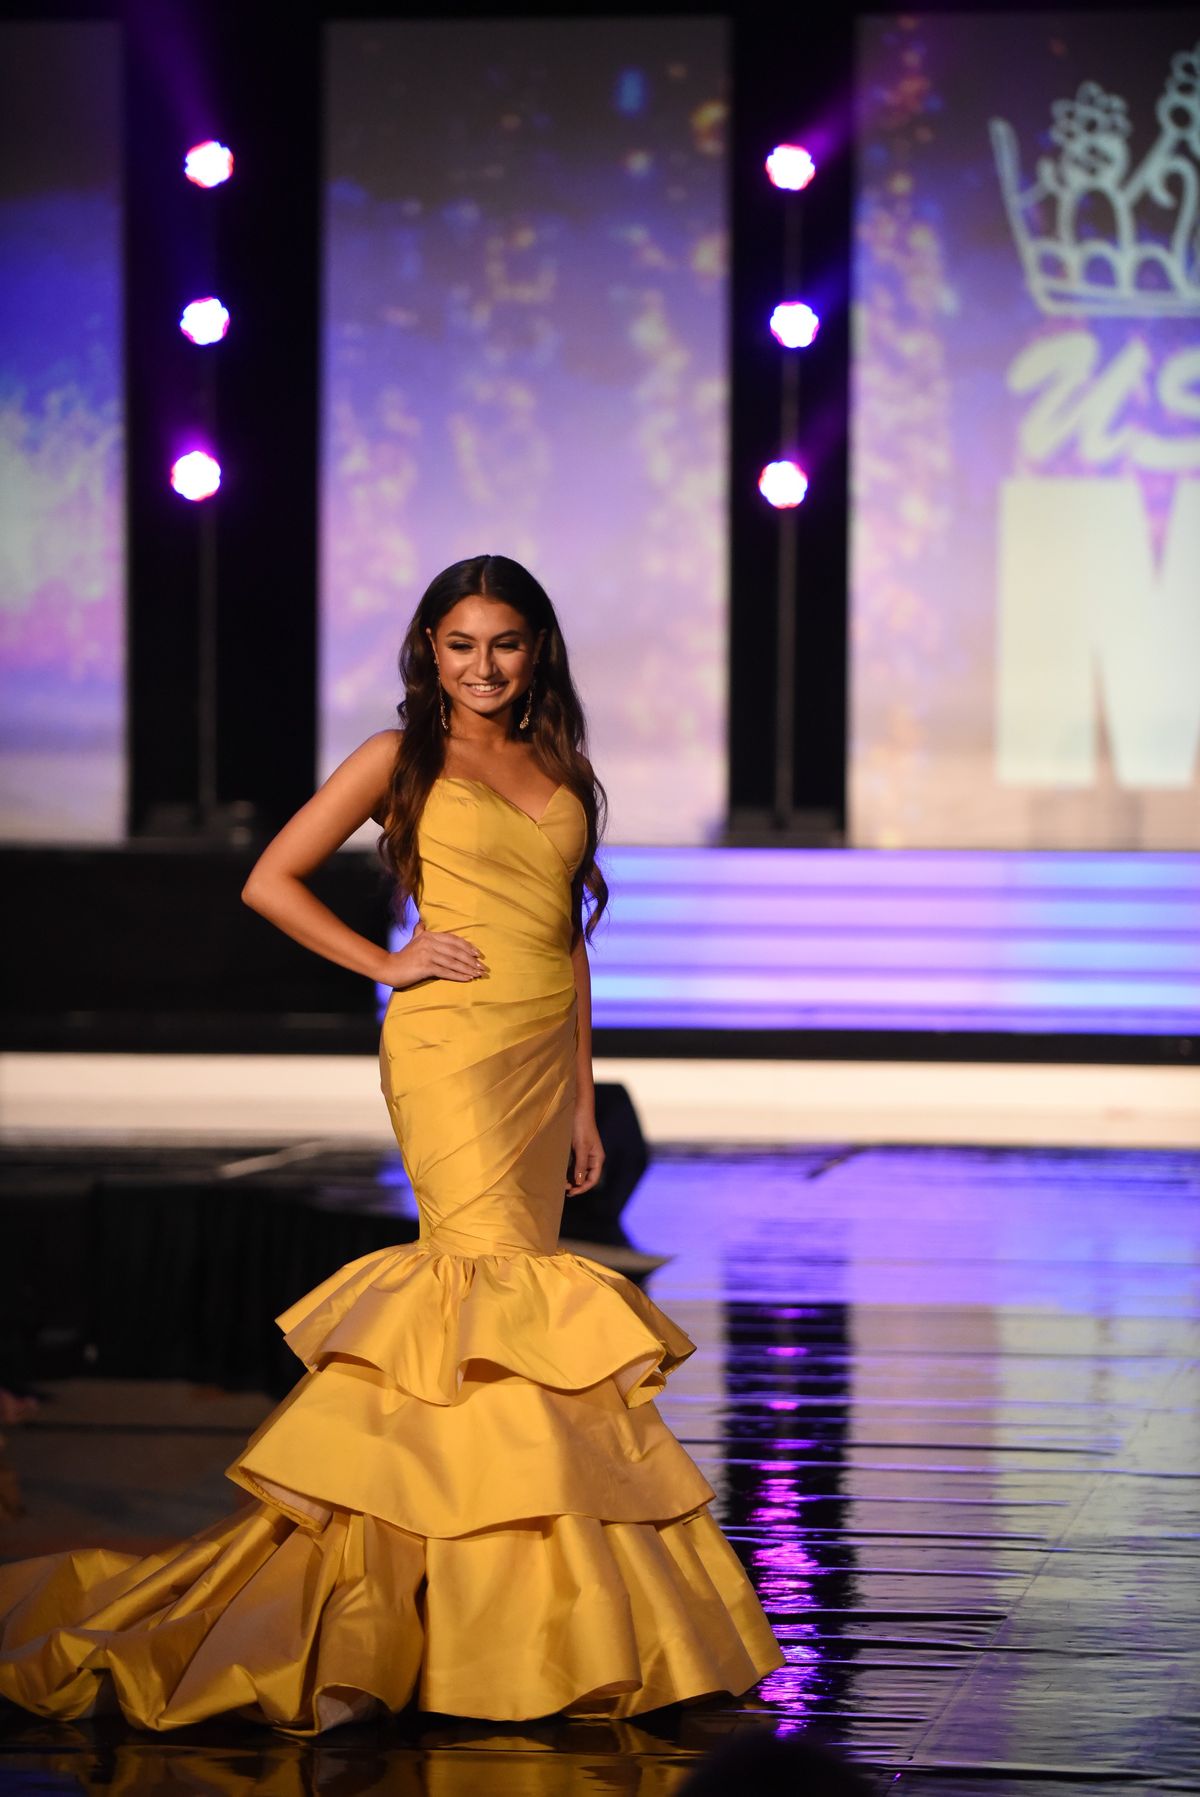 Fernando Wong Size 2 Prom Yellow Mermaid Dress on Queenly